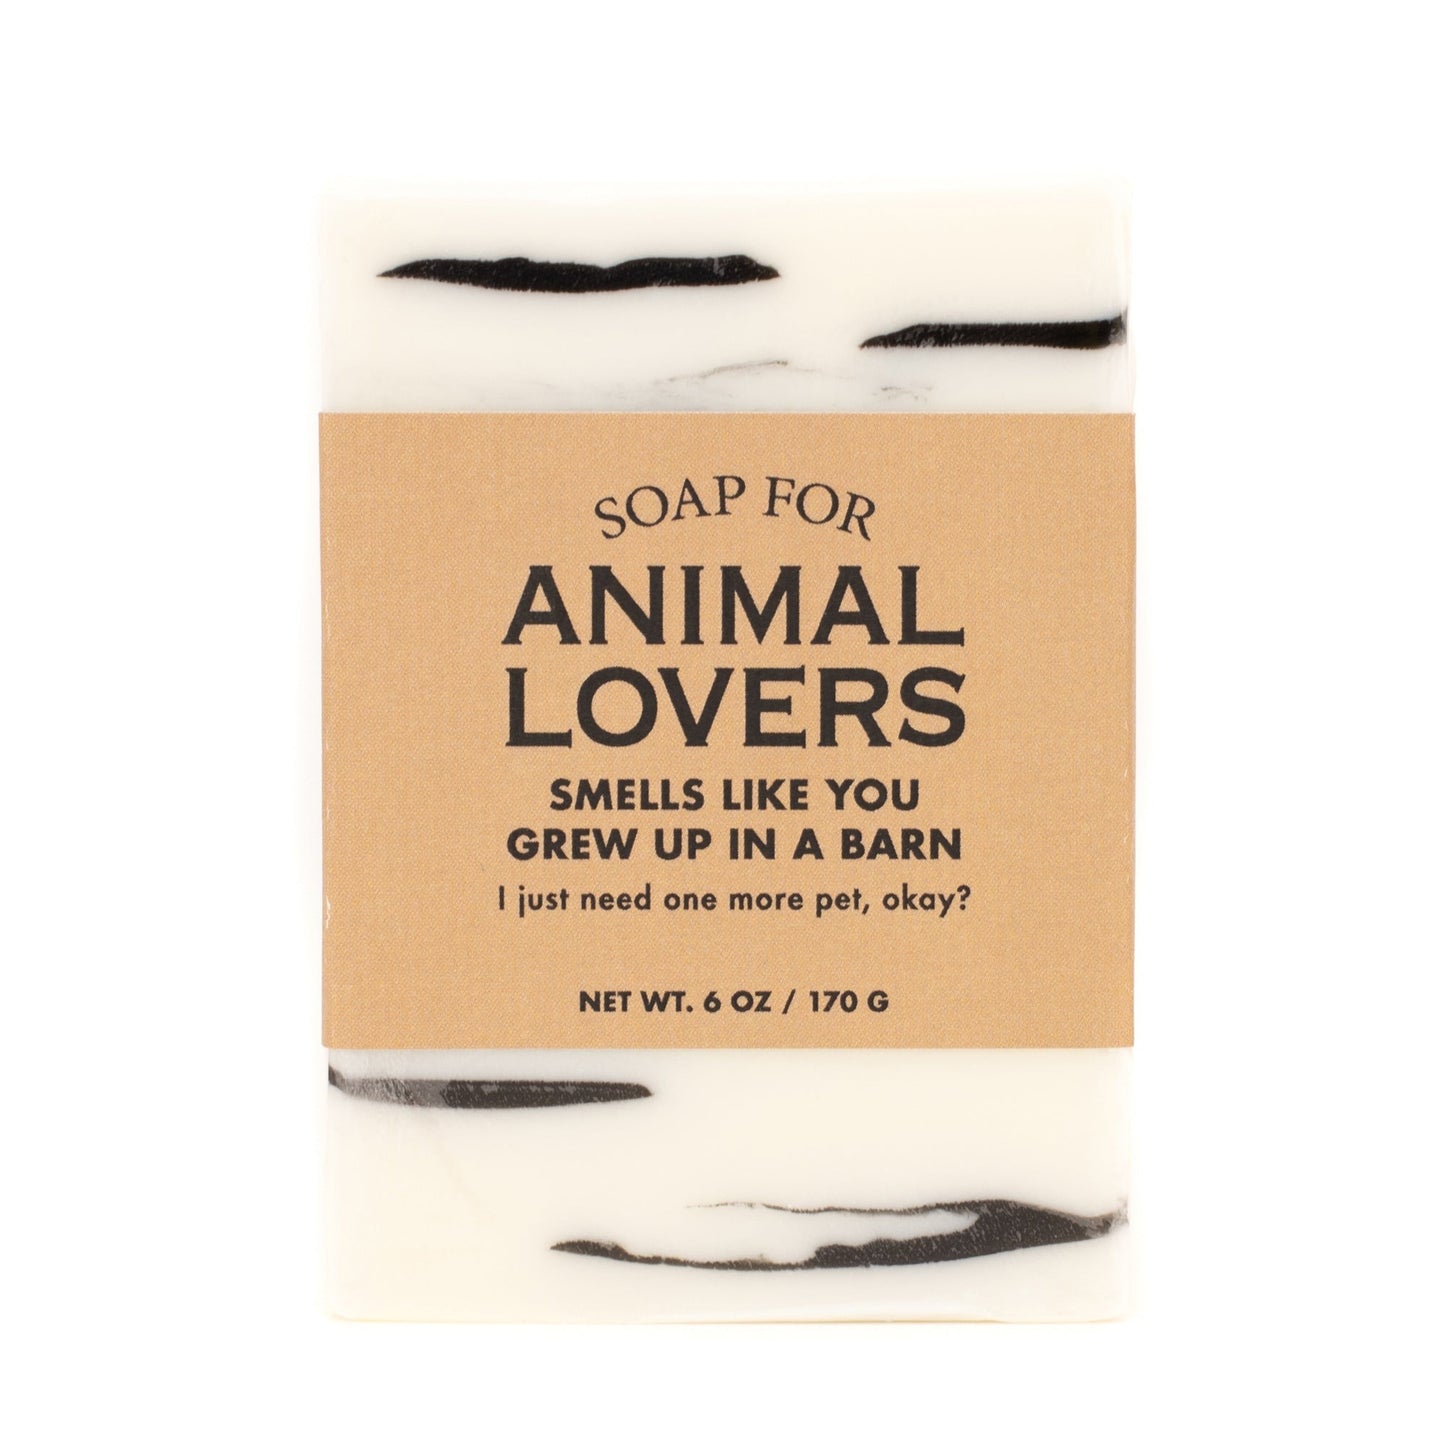 Soap - Animal Lovers